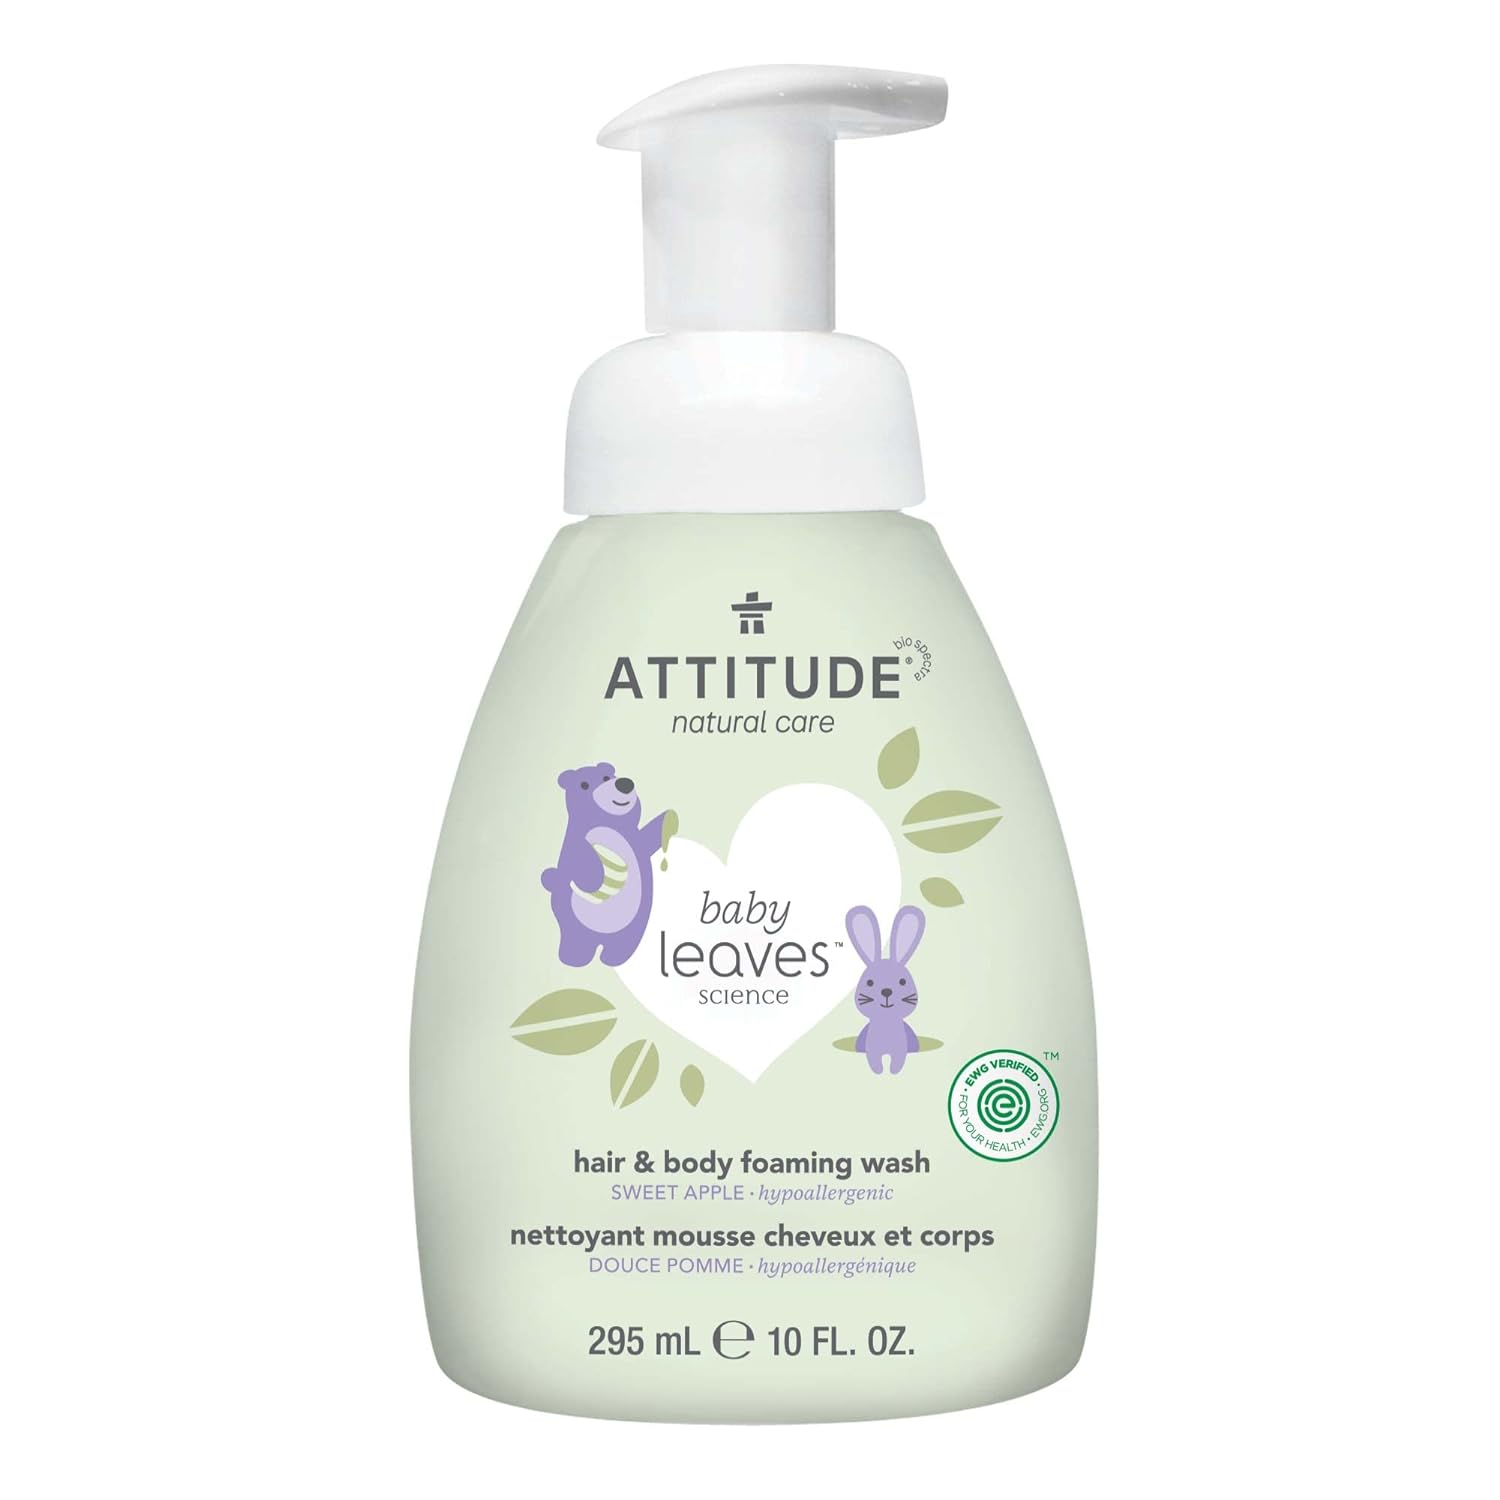 ATTITUDE 2-in-1 Hair and Body Foaming Baby Wash, EWG Verified Shampoo Soap, Dermatologically Tested, Made with Naturally Derived Ingredients, Vegan, Sweet Apple, 10 Fl Oz